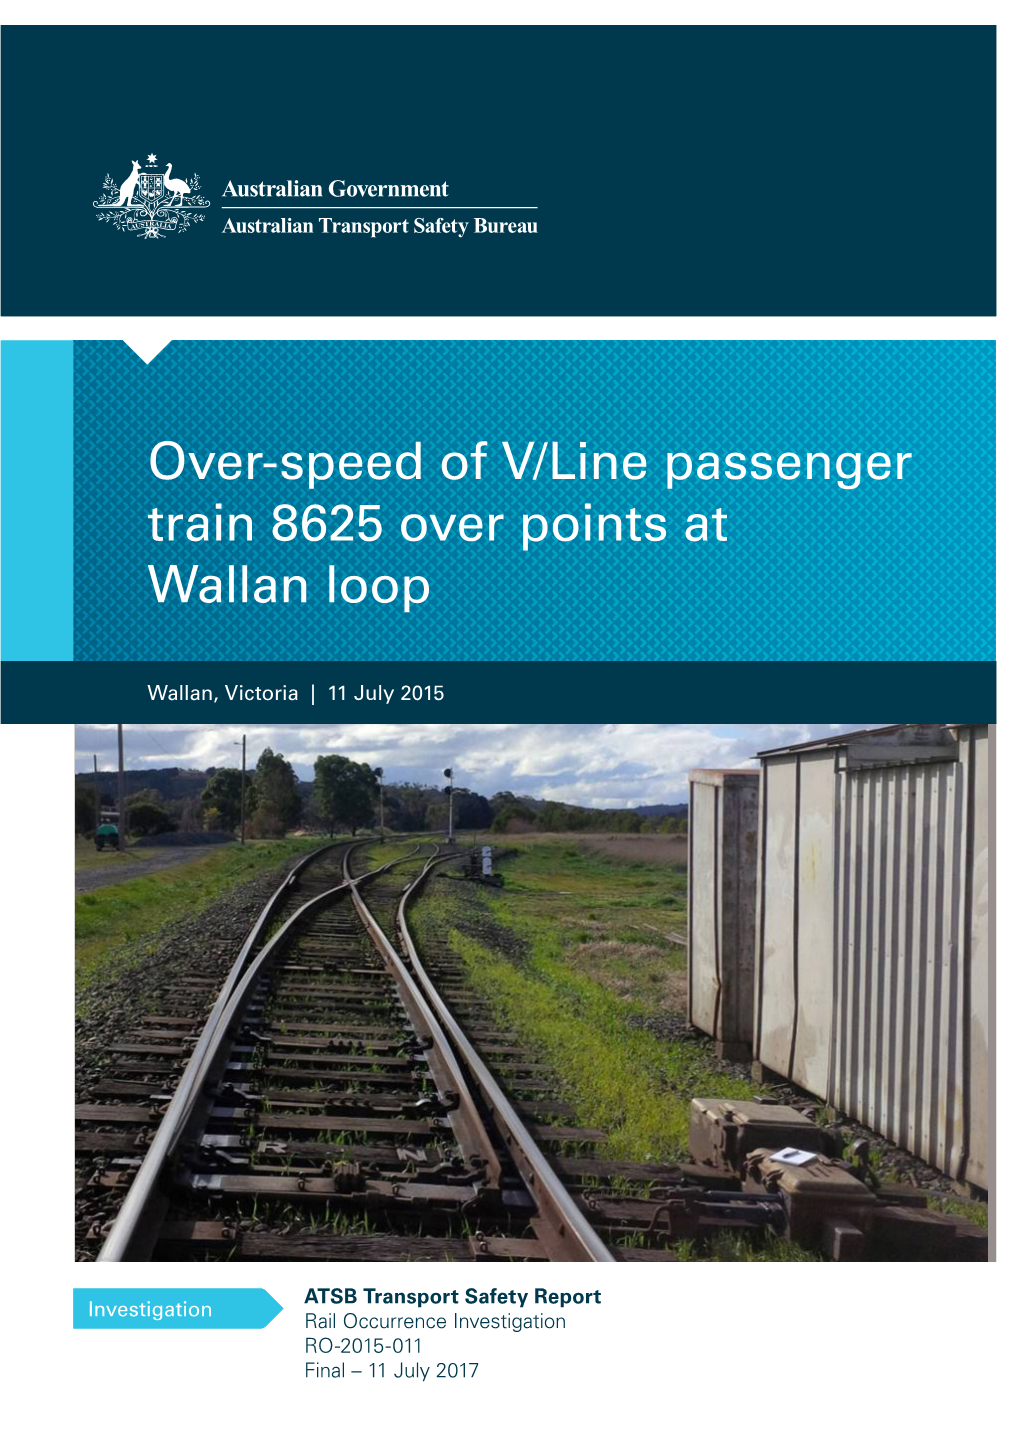 Over-Speed of V/Line Passenger Train 8625 Over Points at Wallan Loop Wallan, Victoria 11 July 2015